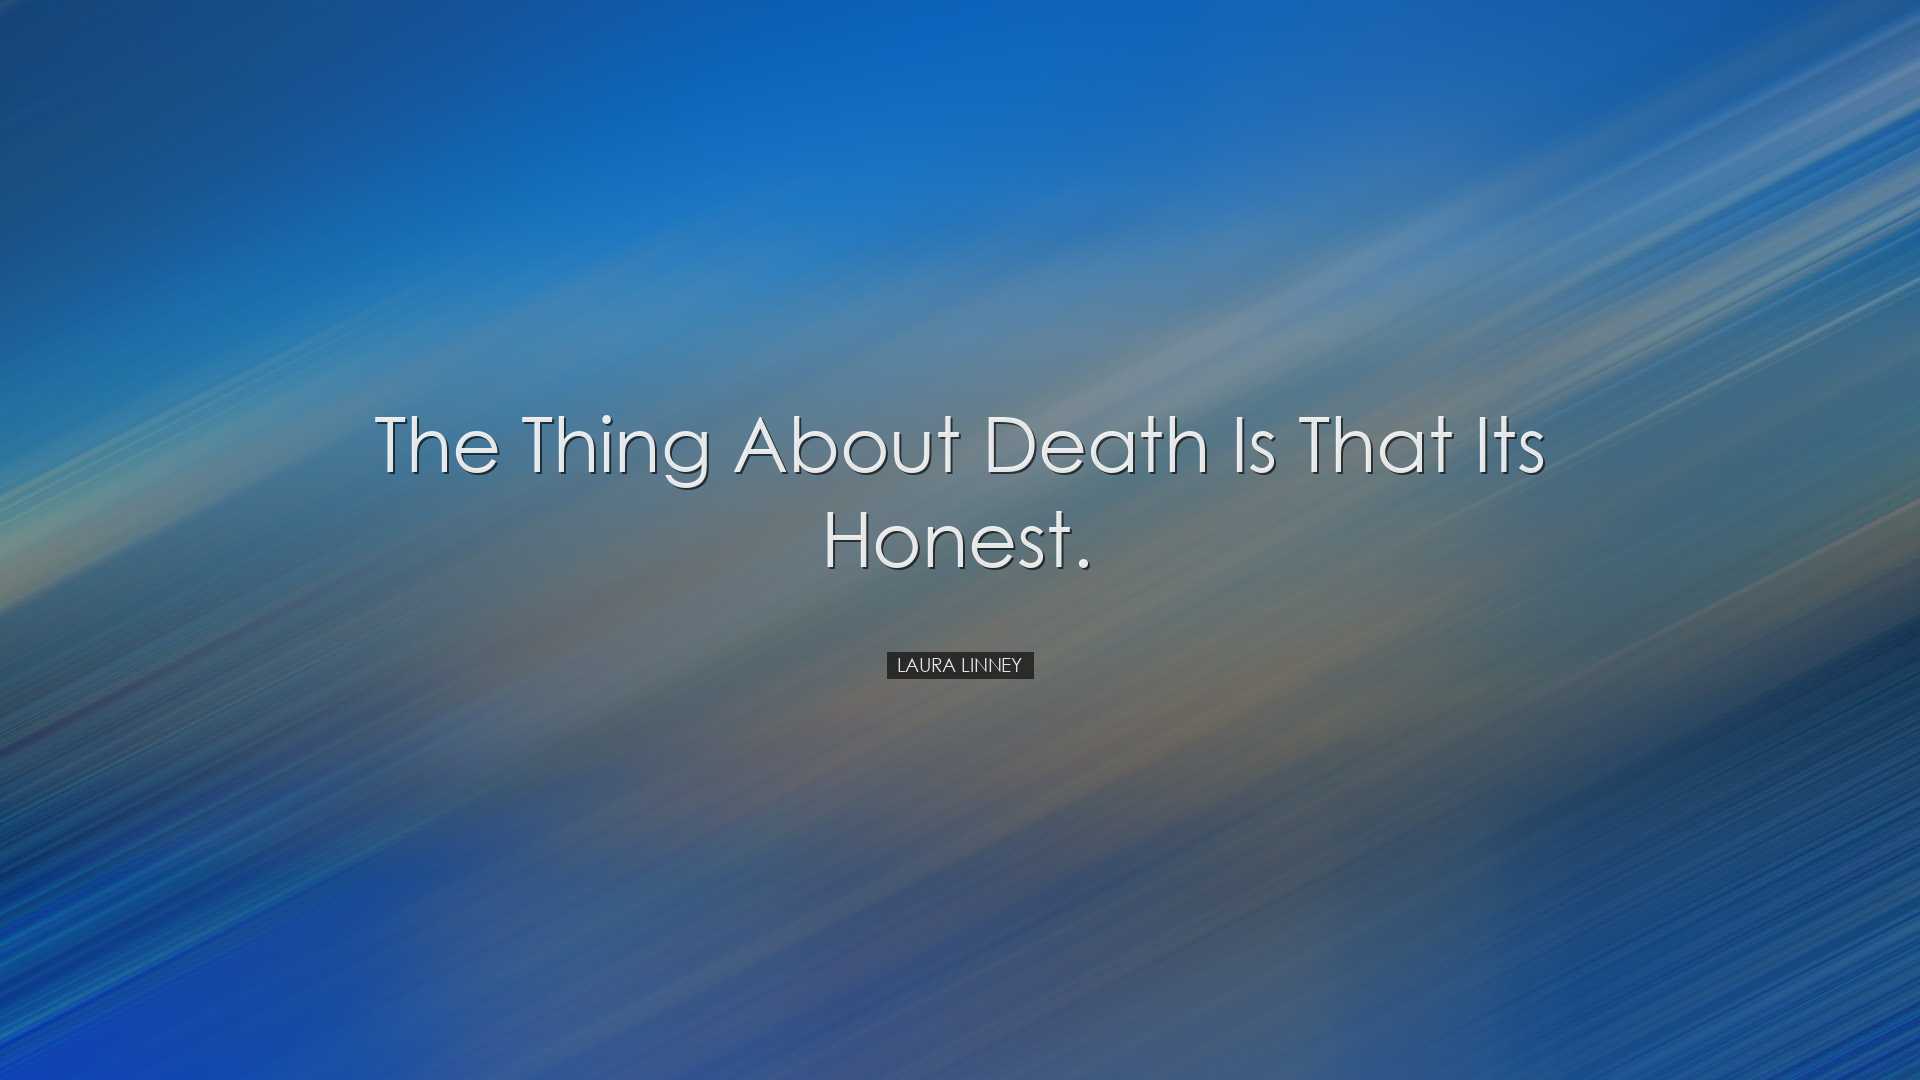 The thing about death is that its honest. - Laura Linney